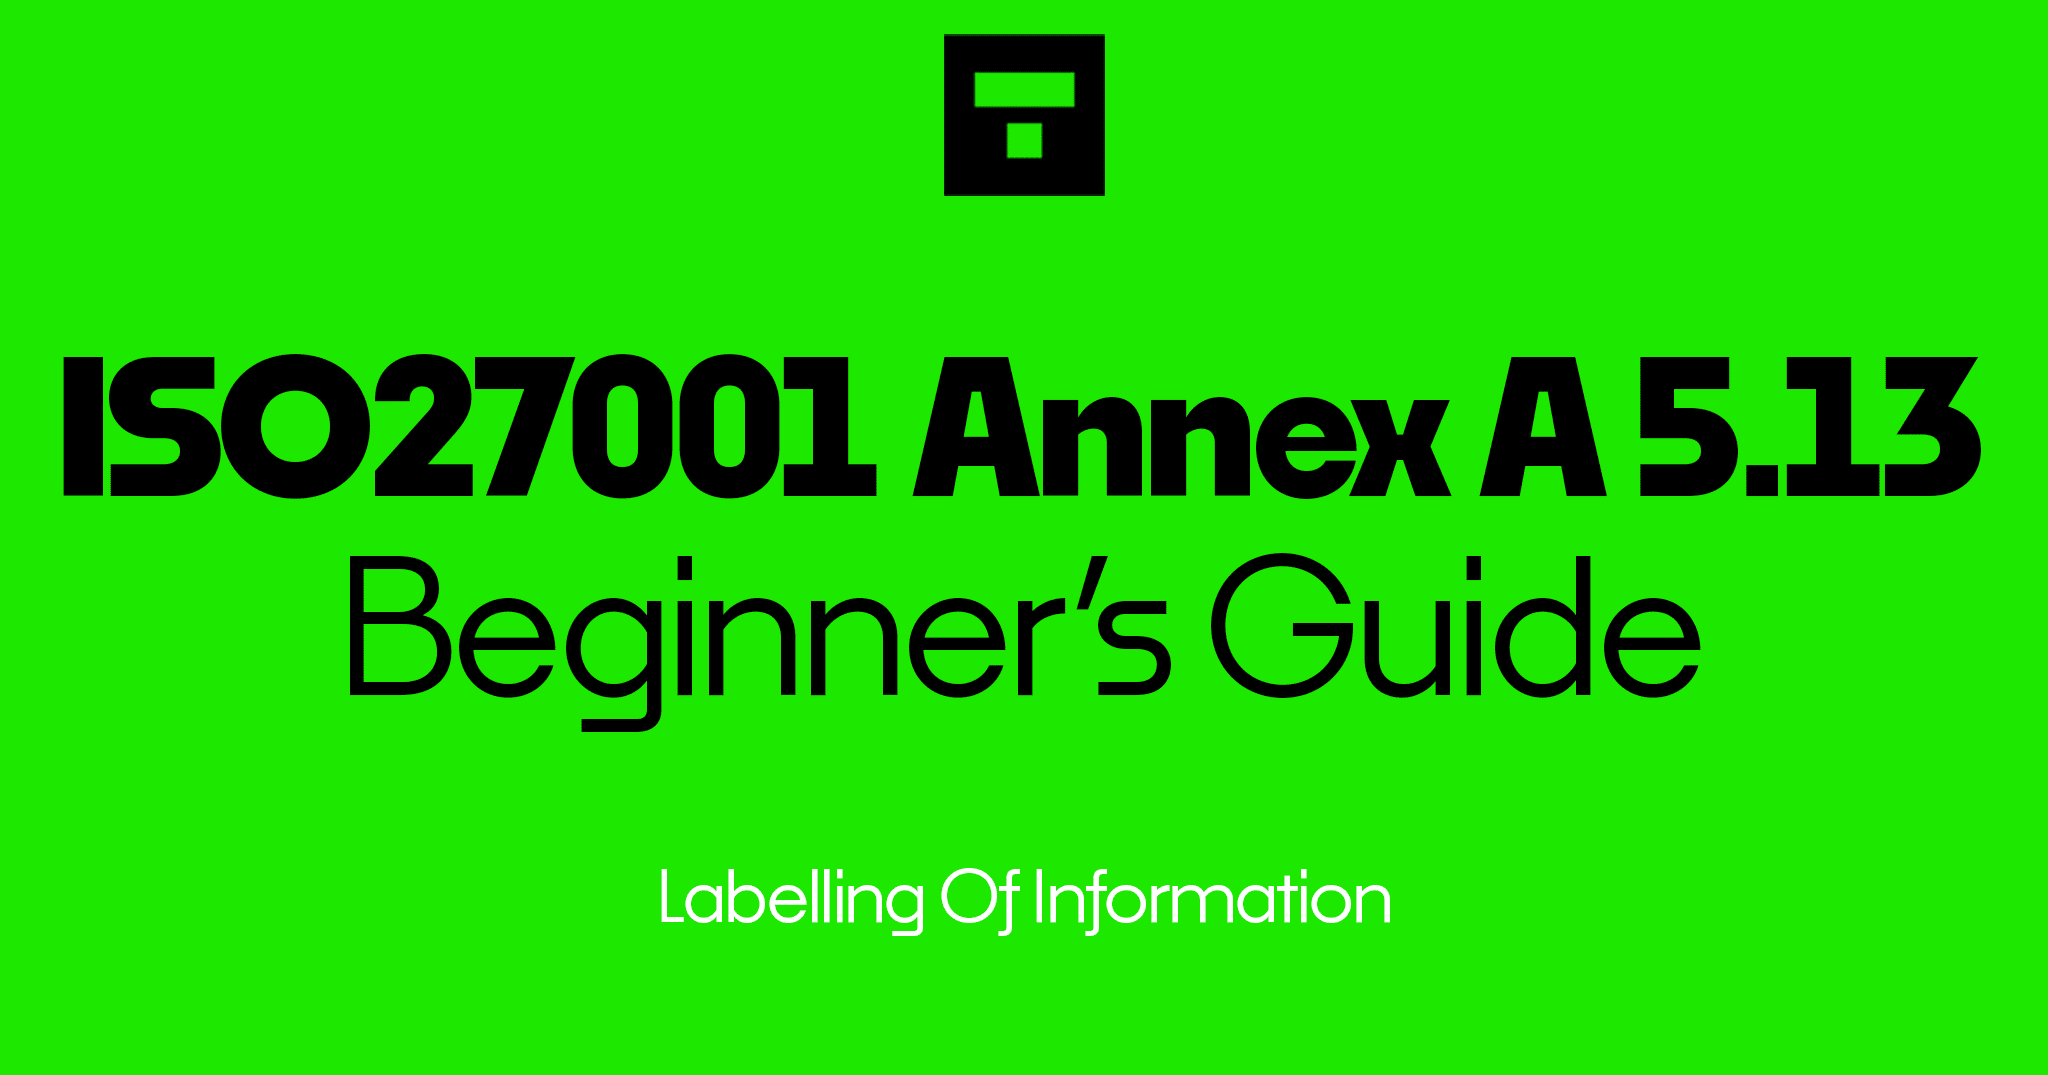 How To Implement ISO 27001 Annex A 5.13 Labelling Of Information